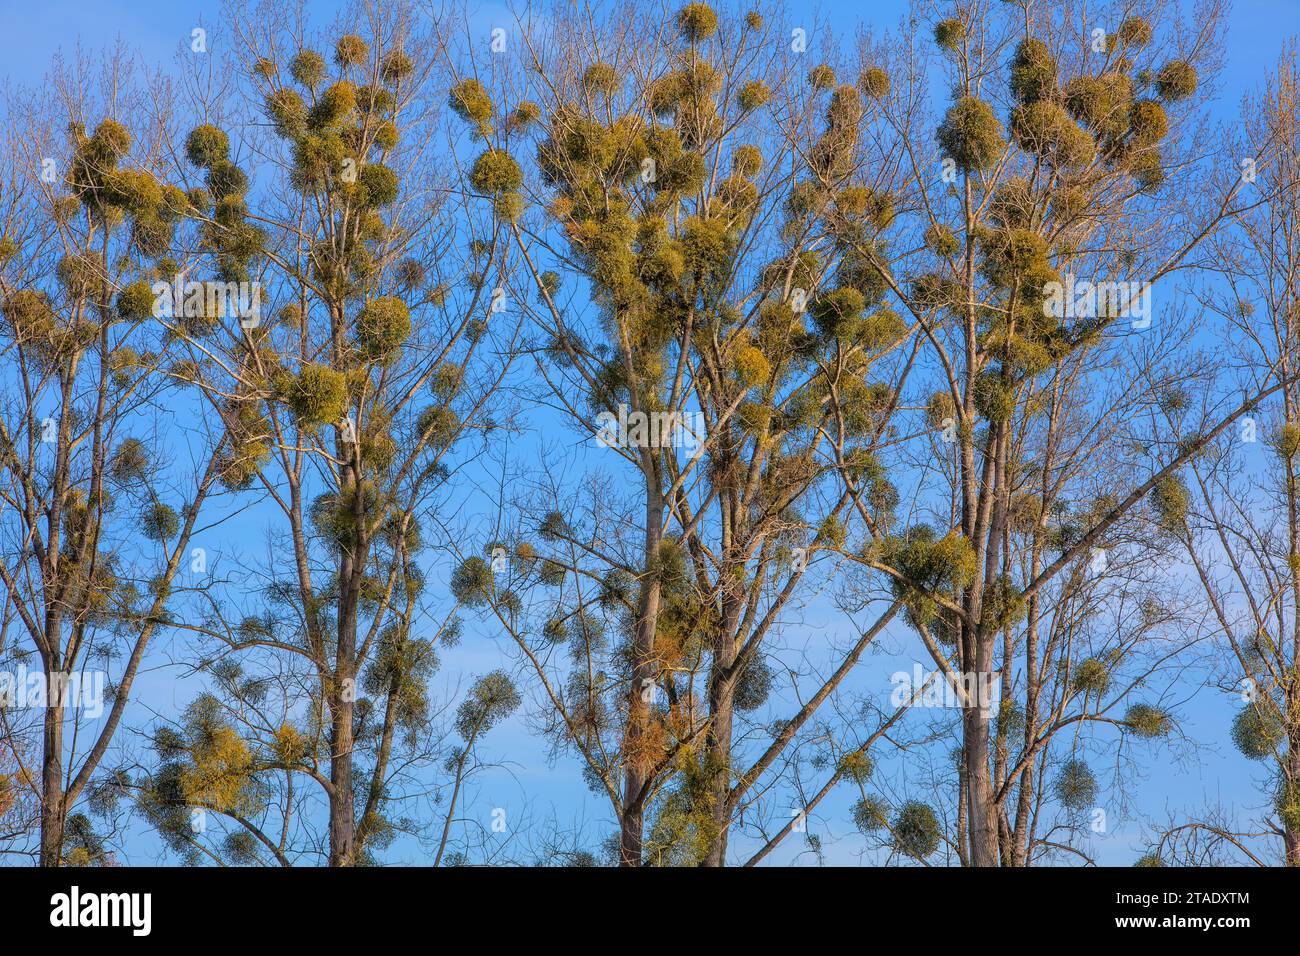 Populus trees with mistletoes, Germany Stock Photo